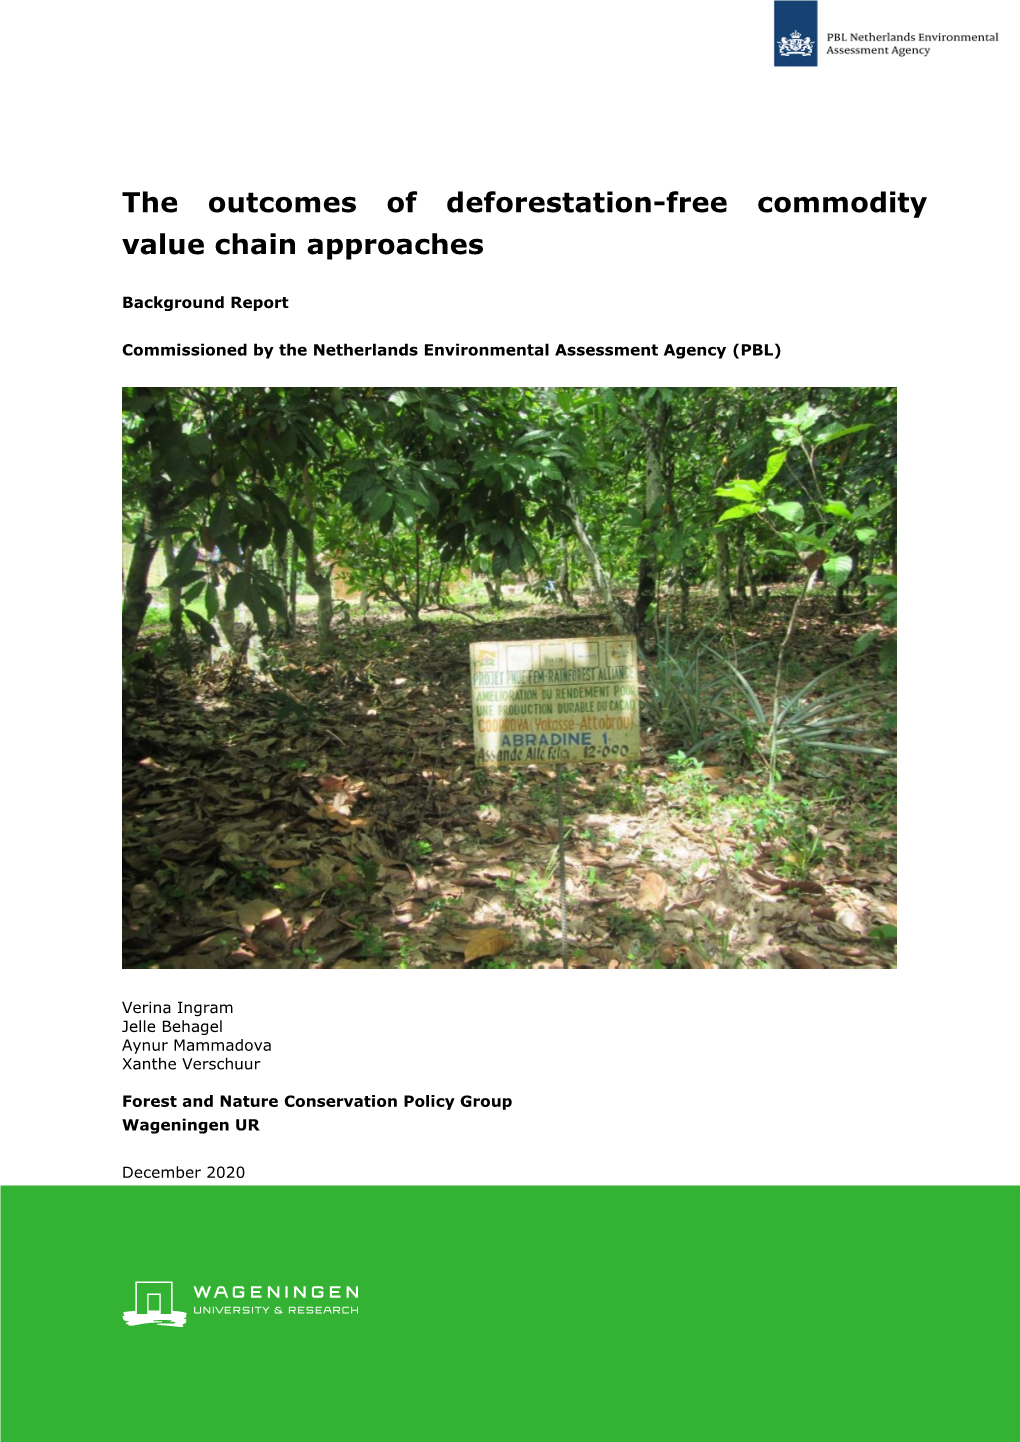 The Outcomes of Deforestation-Free Commodity Value Chain Approaches